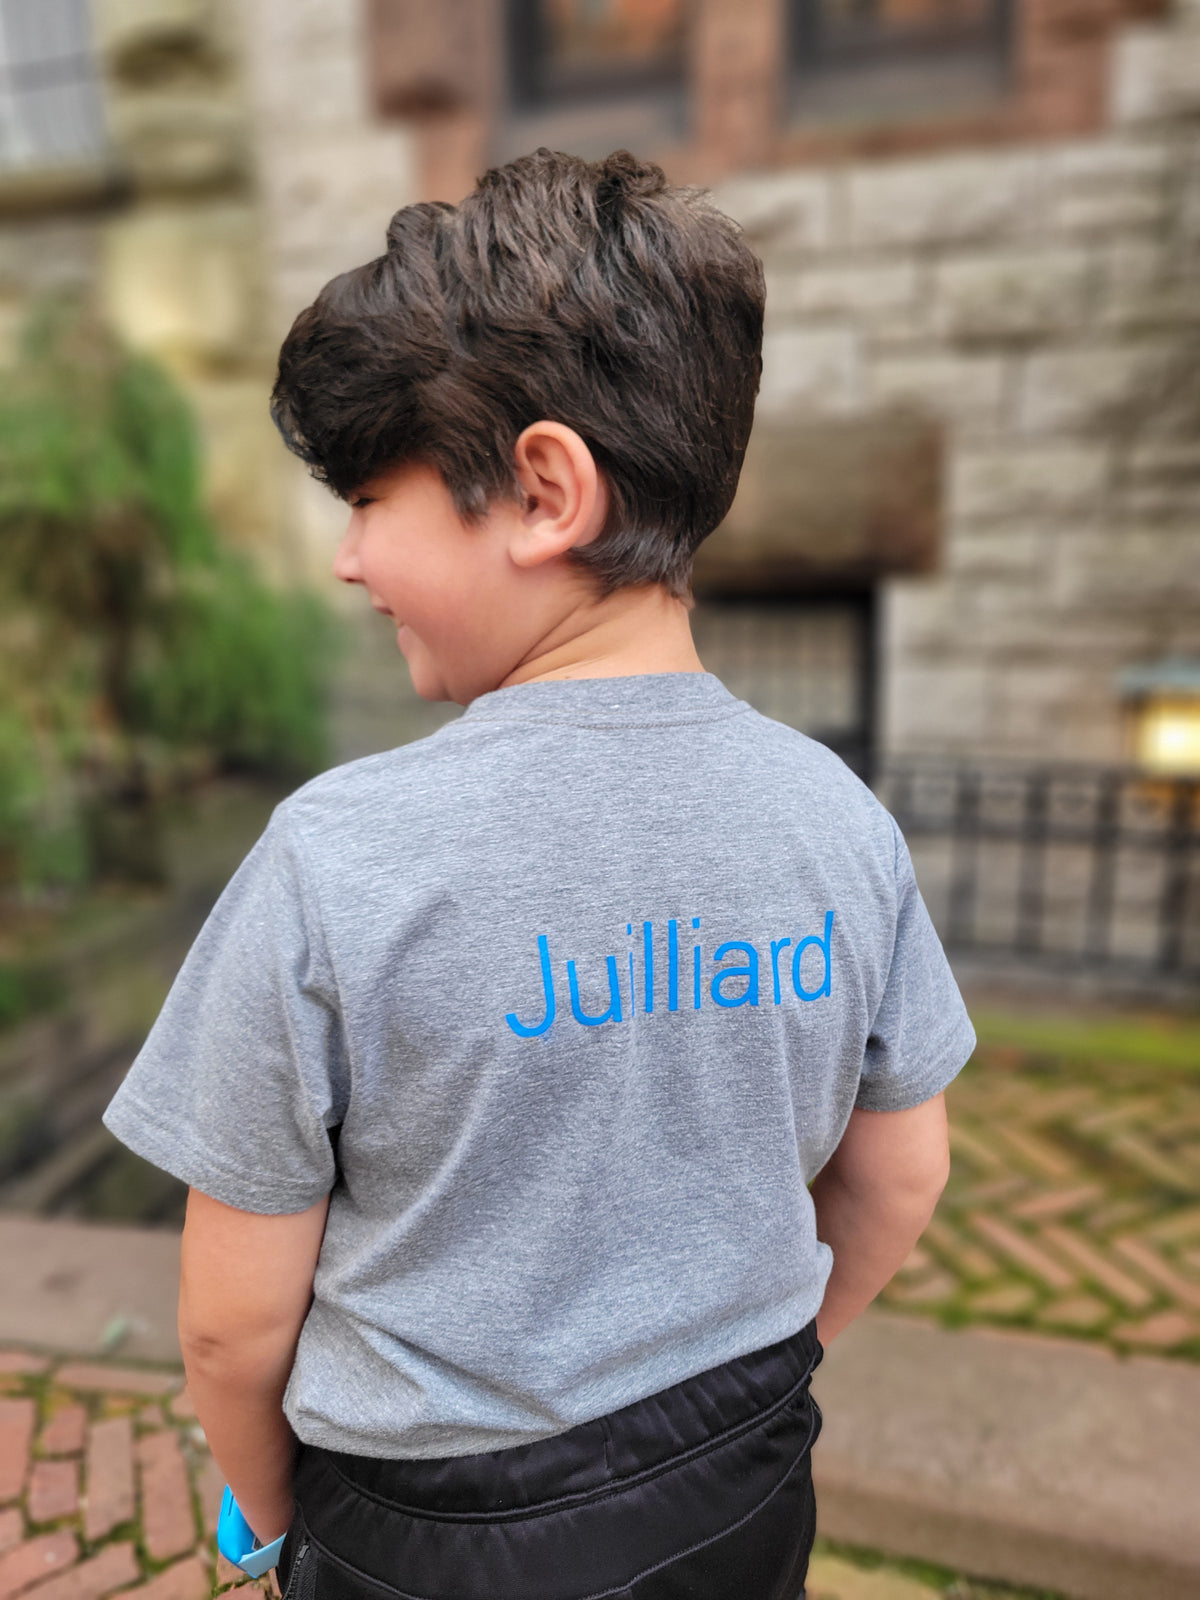 T-Shirt: YOUTH Juilliard Official J Design/Name on Back FINAL SALE / CLEARANCE